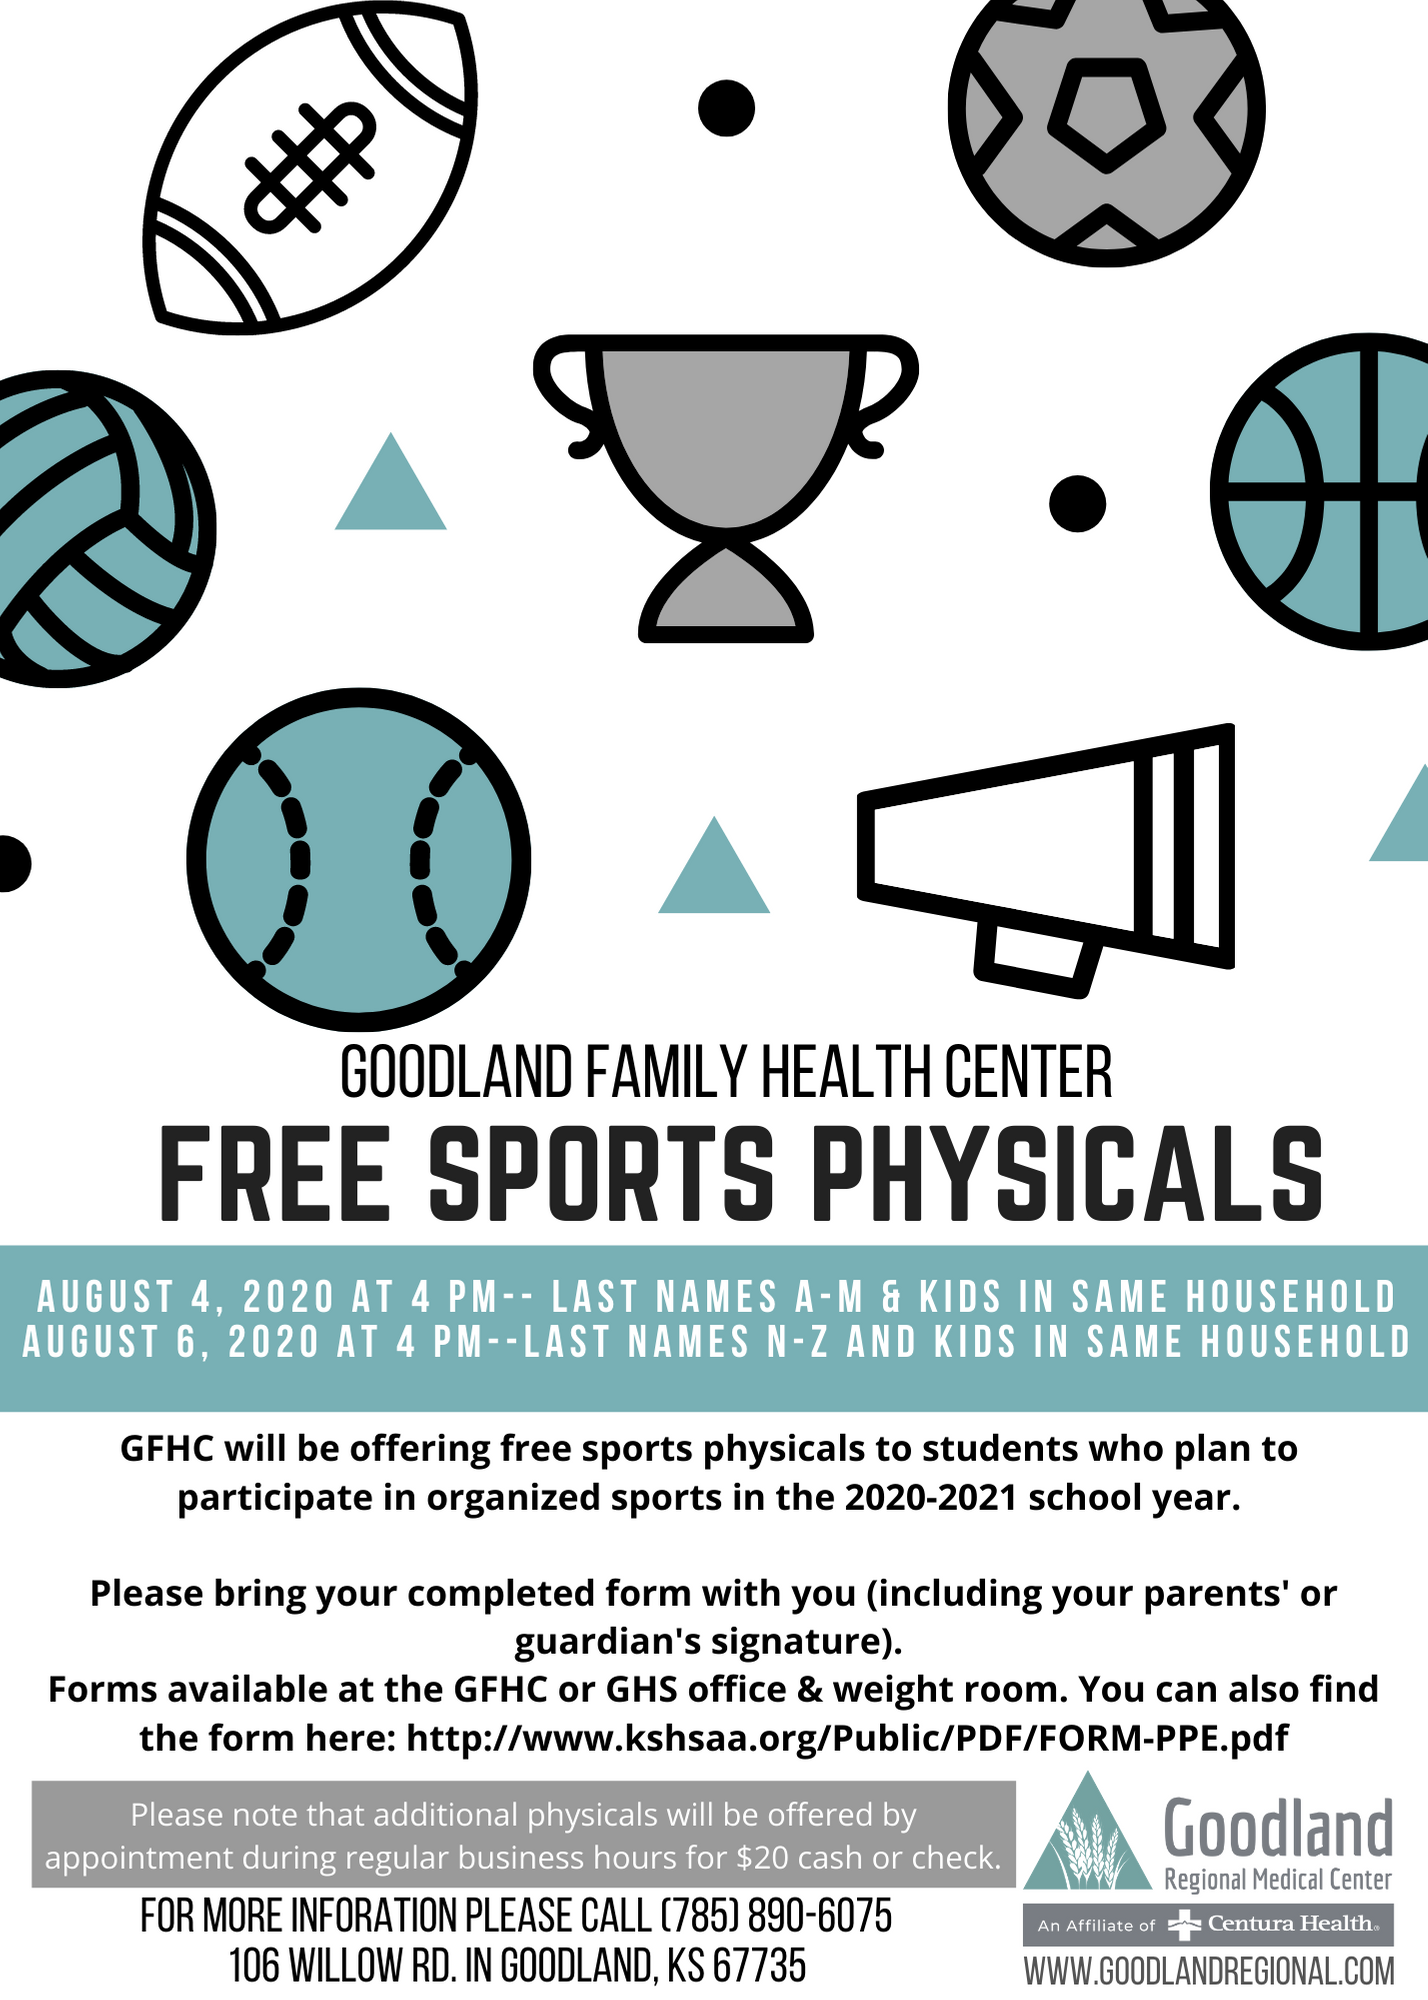 Free Sports Physicals Offered August 4th and August 6th! Goodland